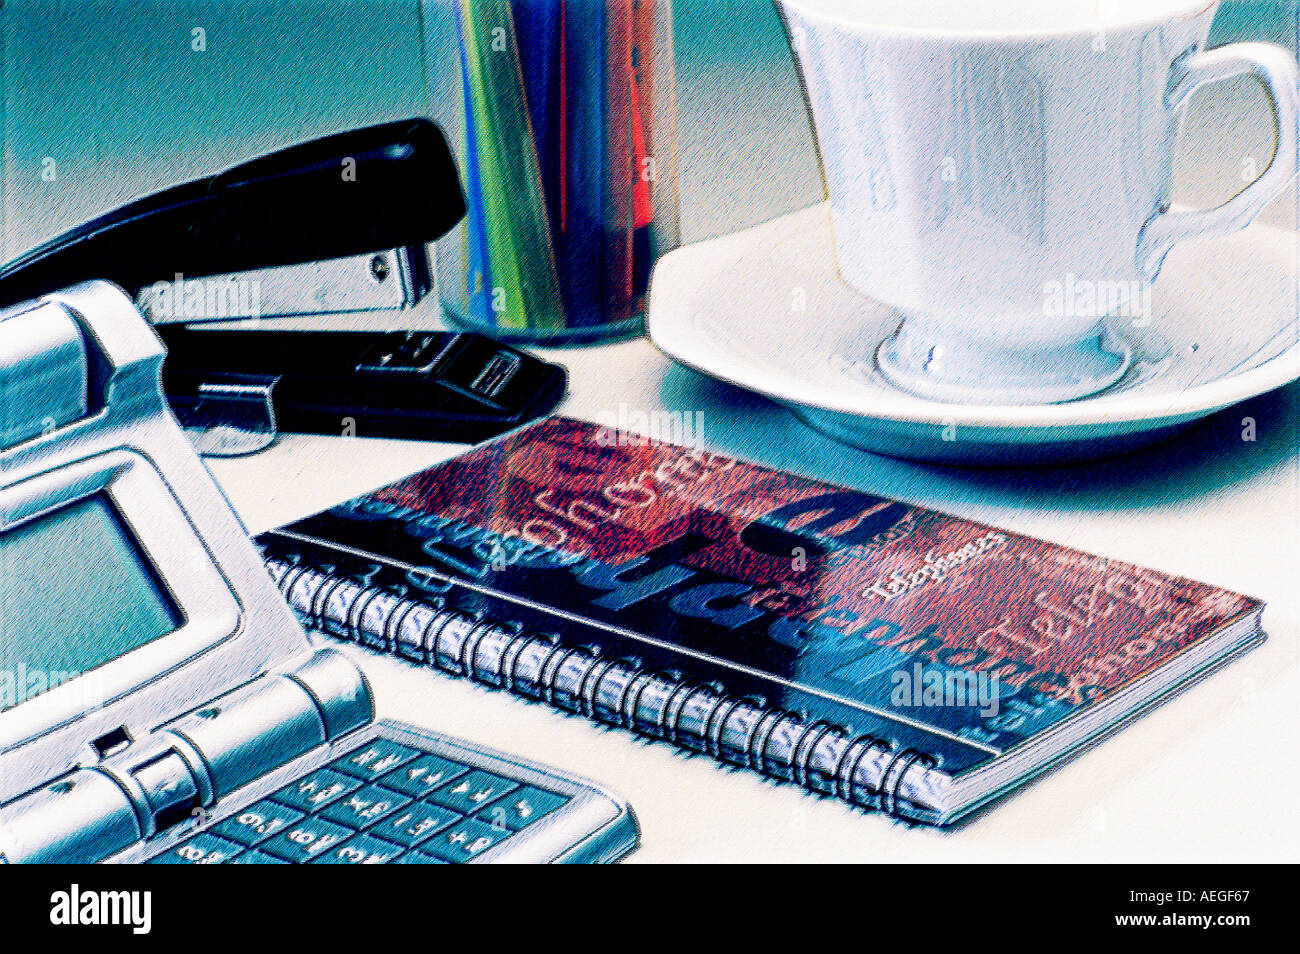 Office calculator stapler address book saucer cup pencil saturated communication business concept Stock Photo